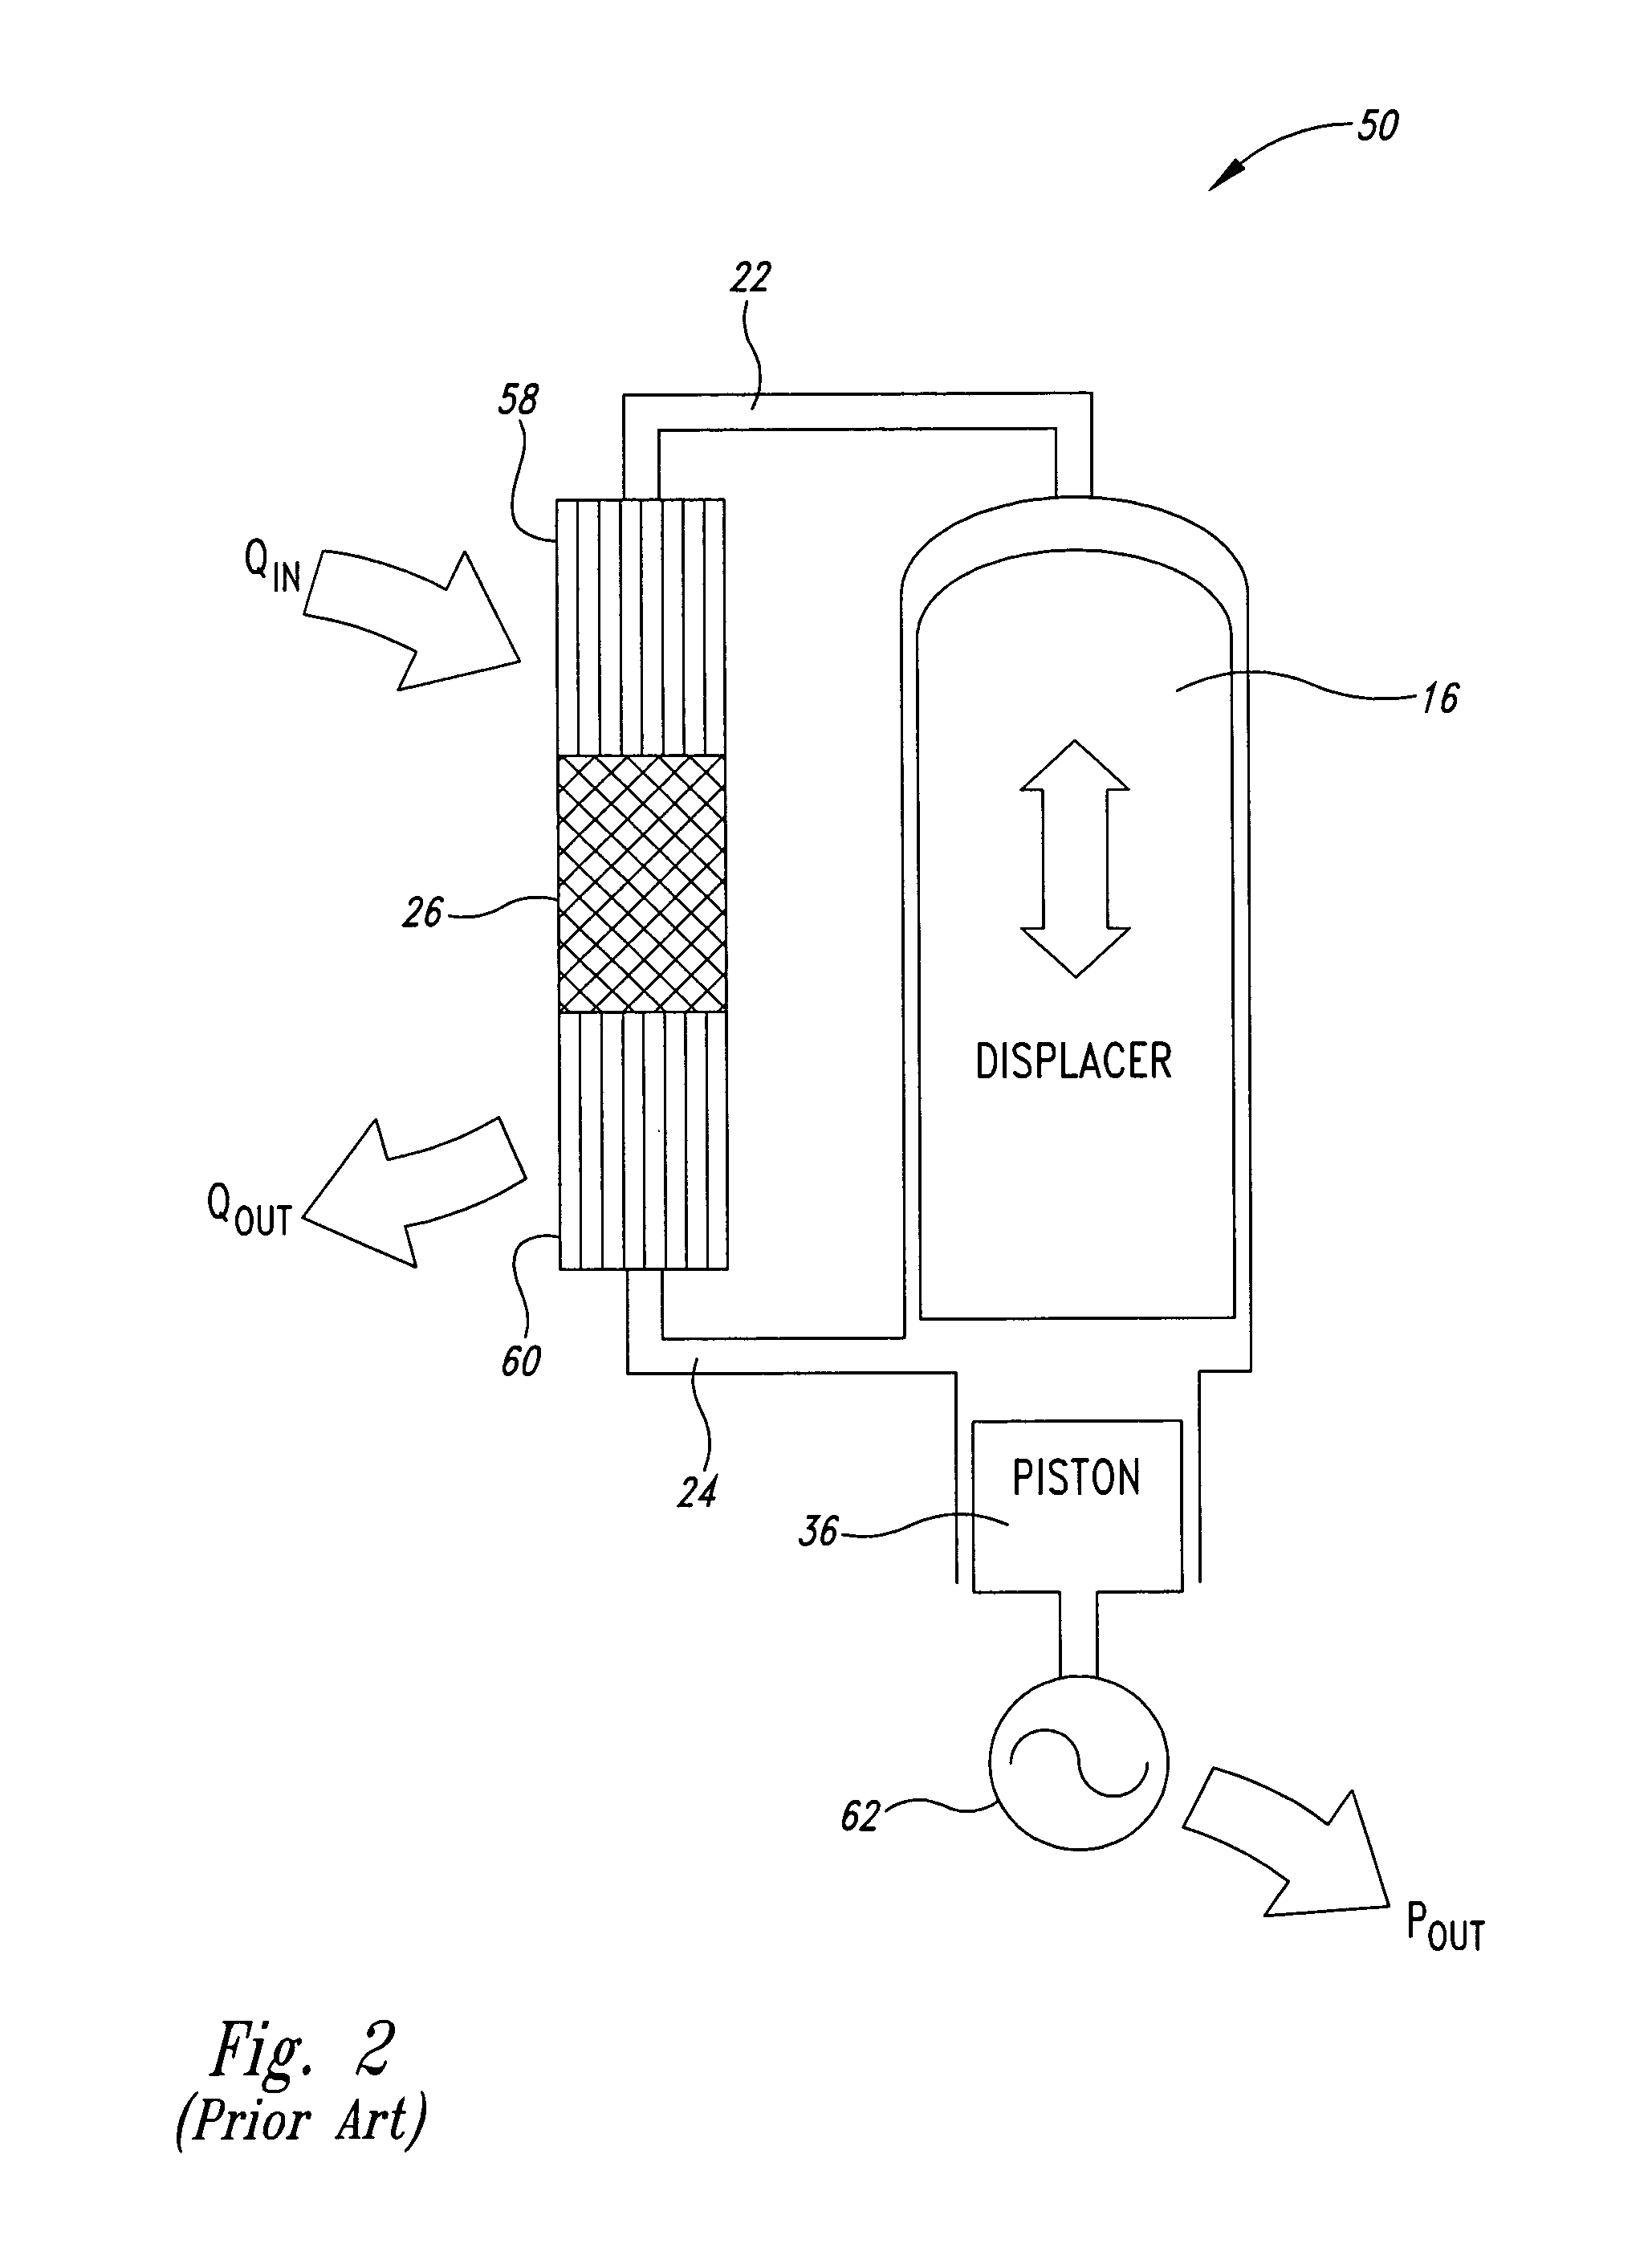 Channelized stratified regenerator system and method